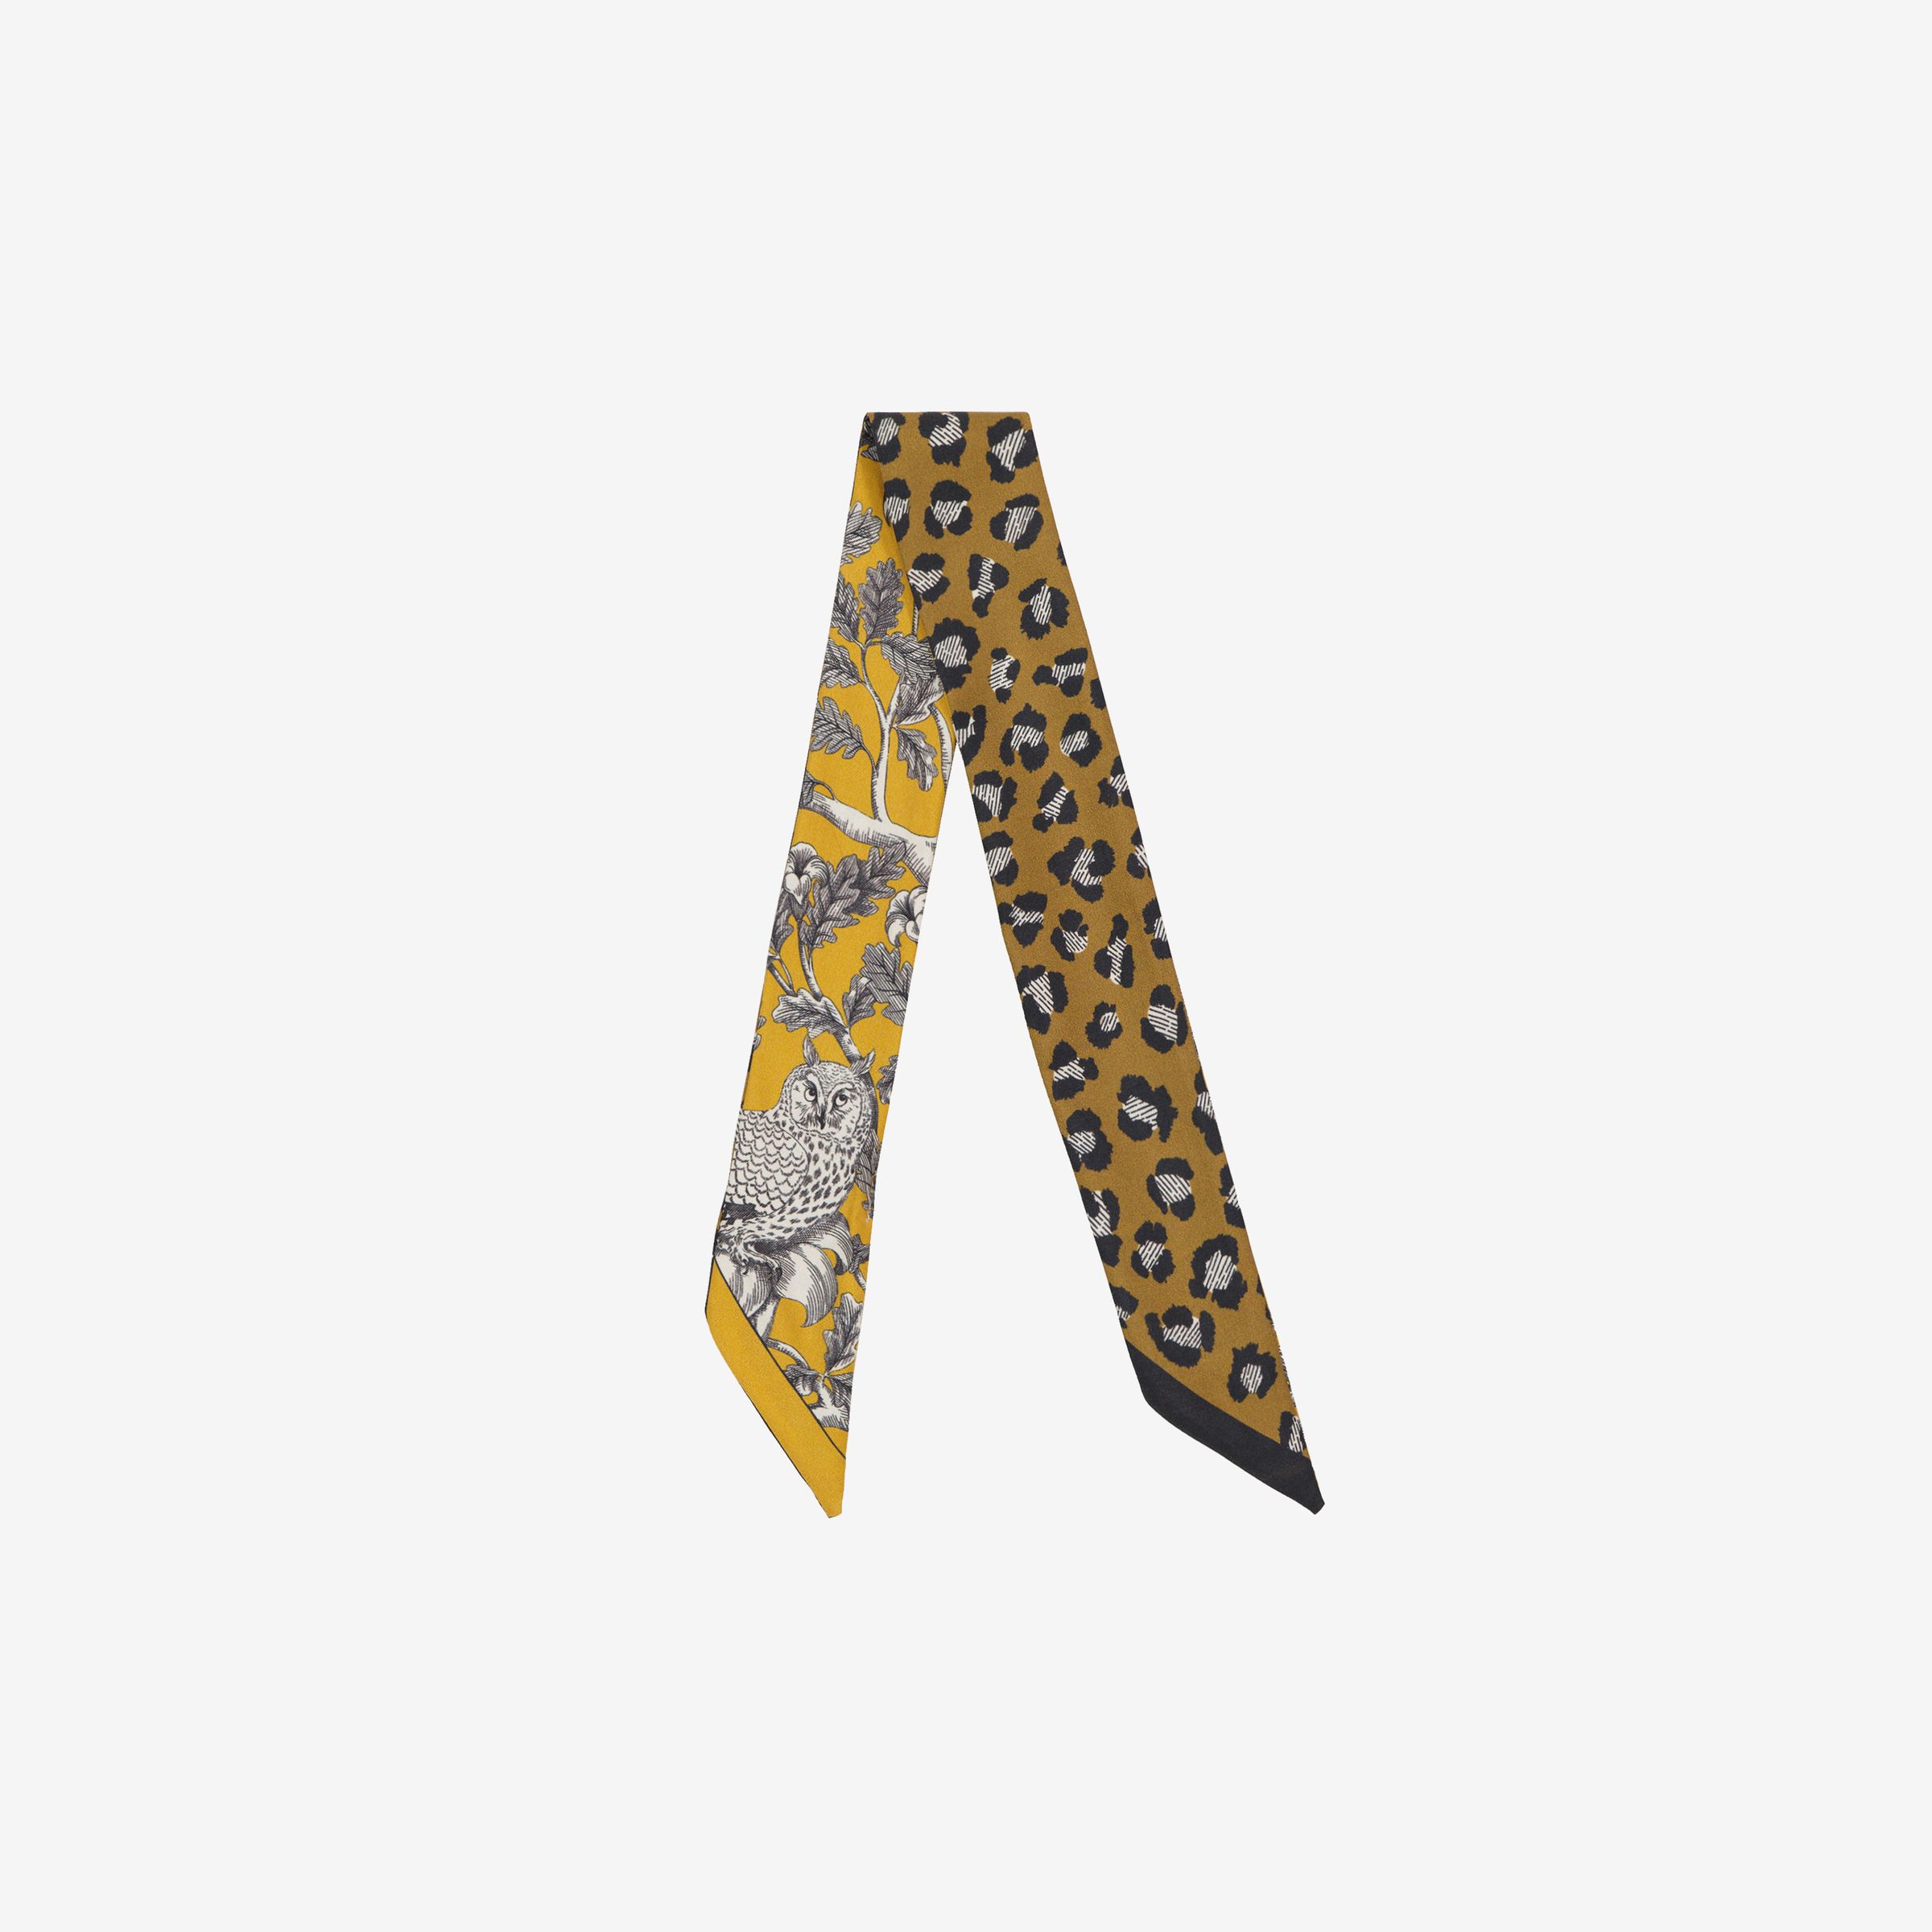 Lavaliere 67 - Archimede - Yellow